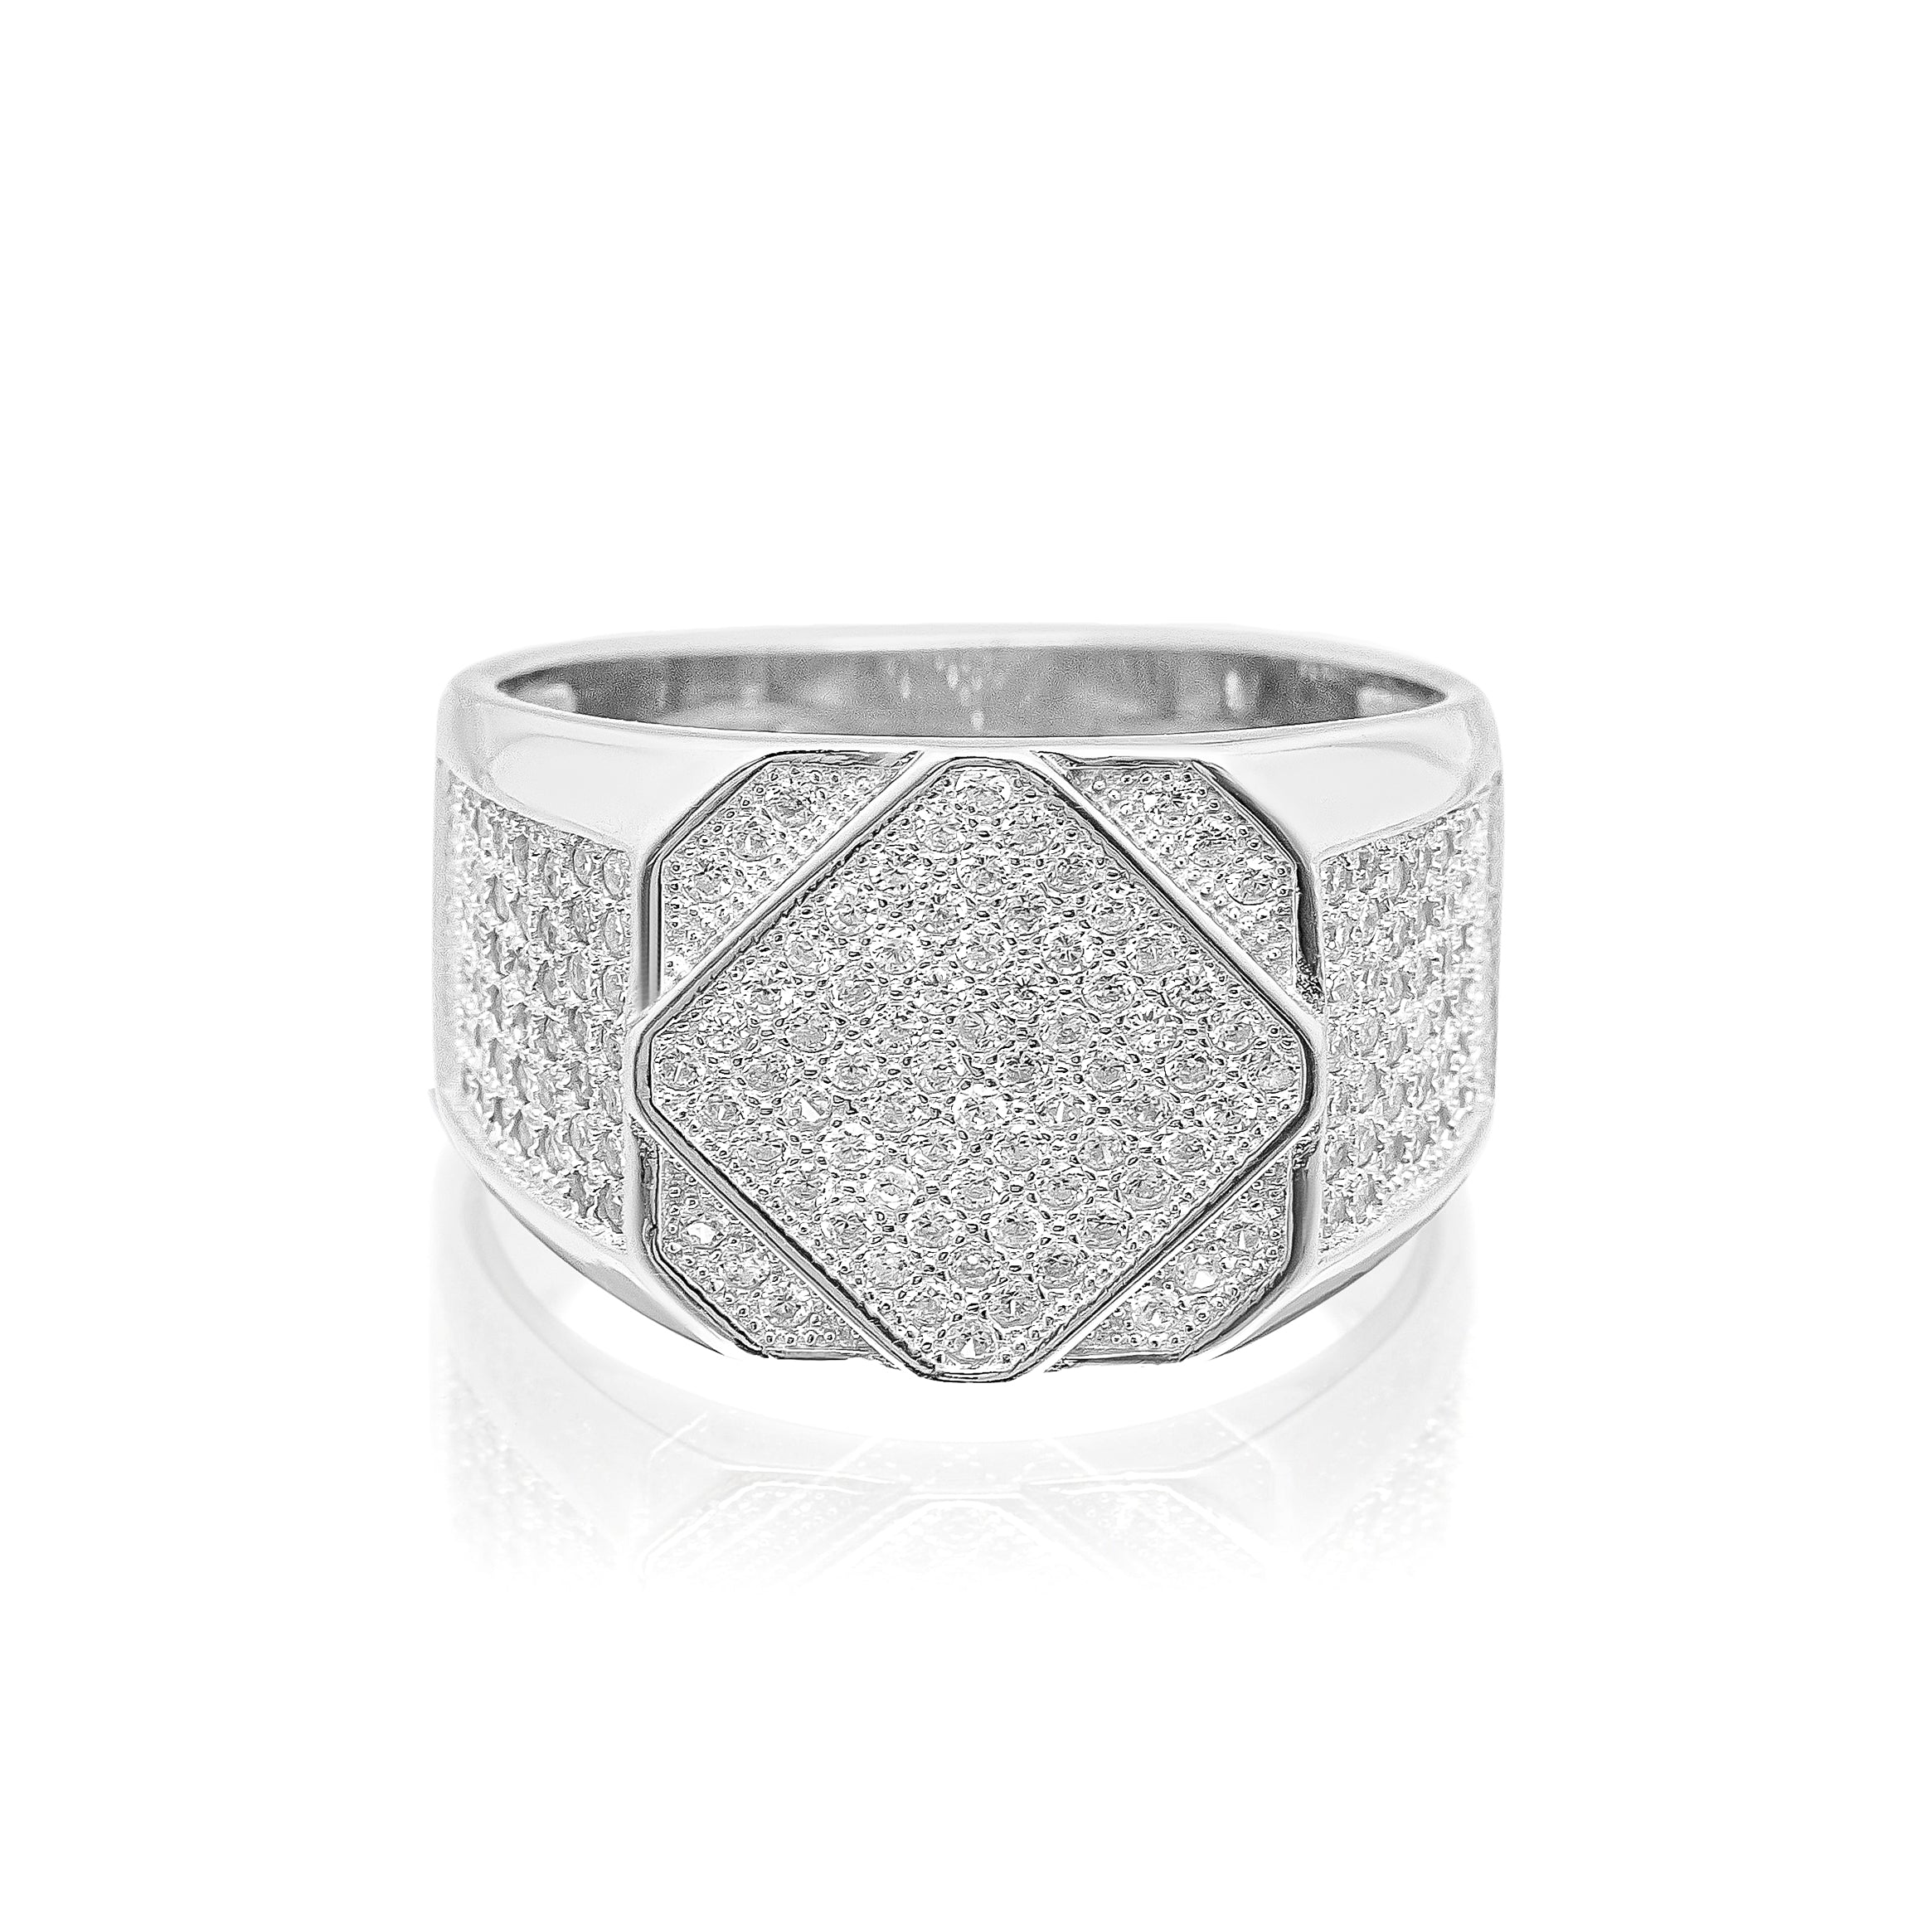 Iced out rings - Zahabi Jewellery